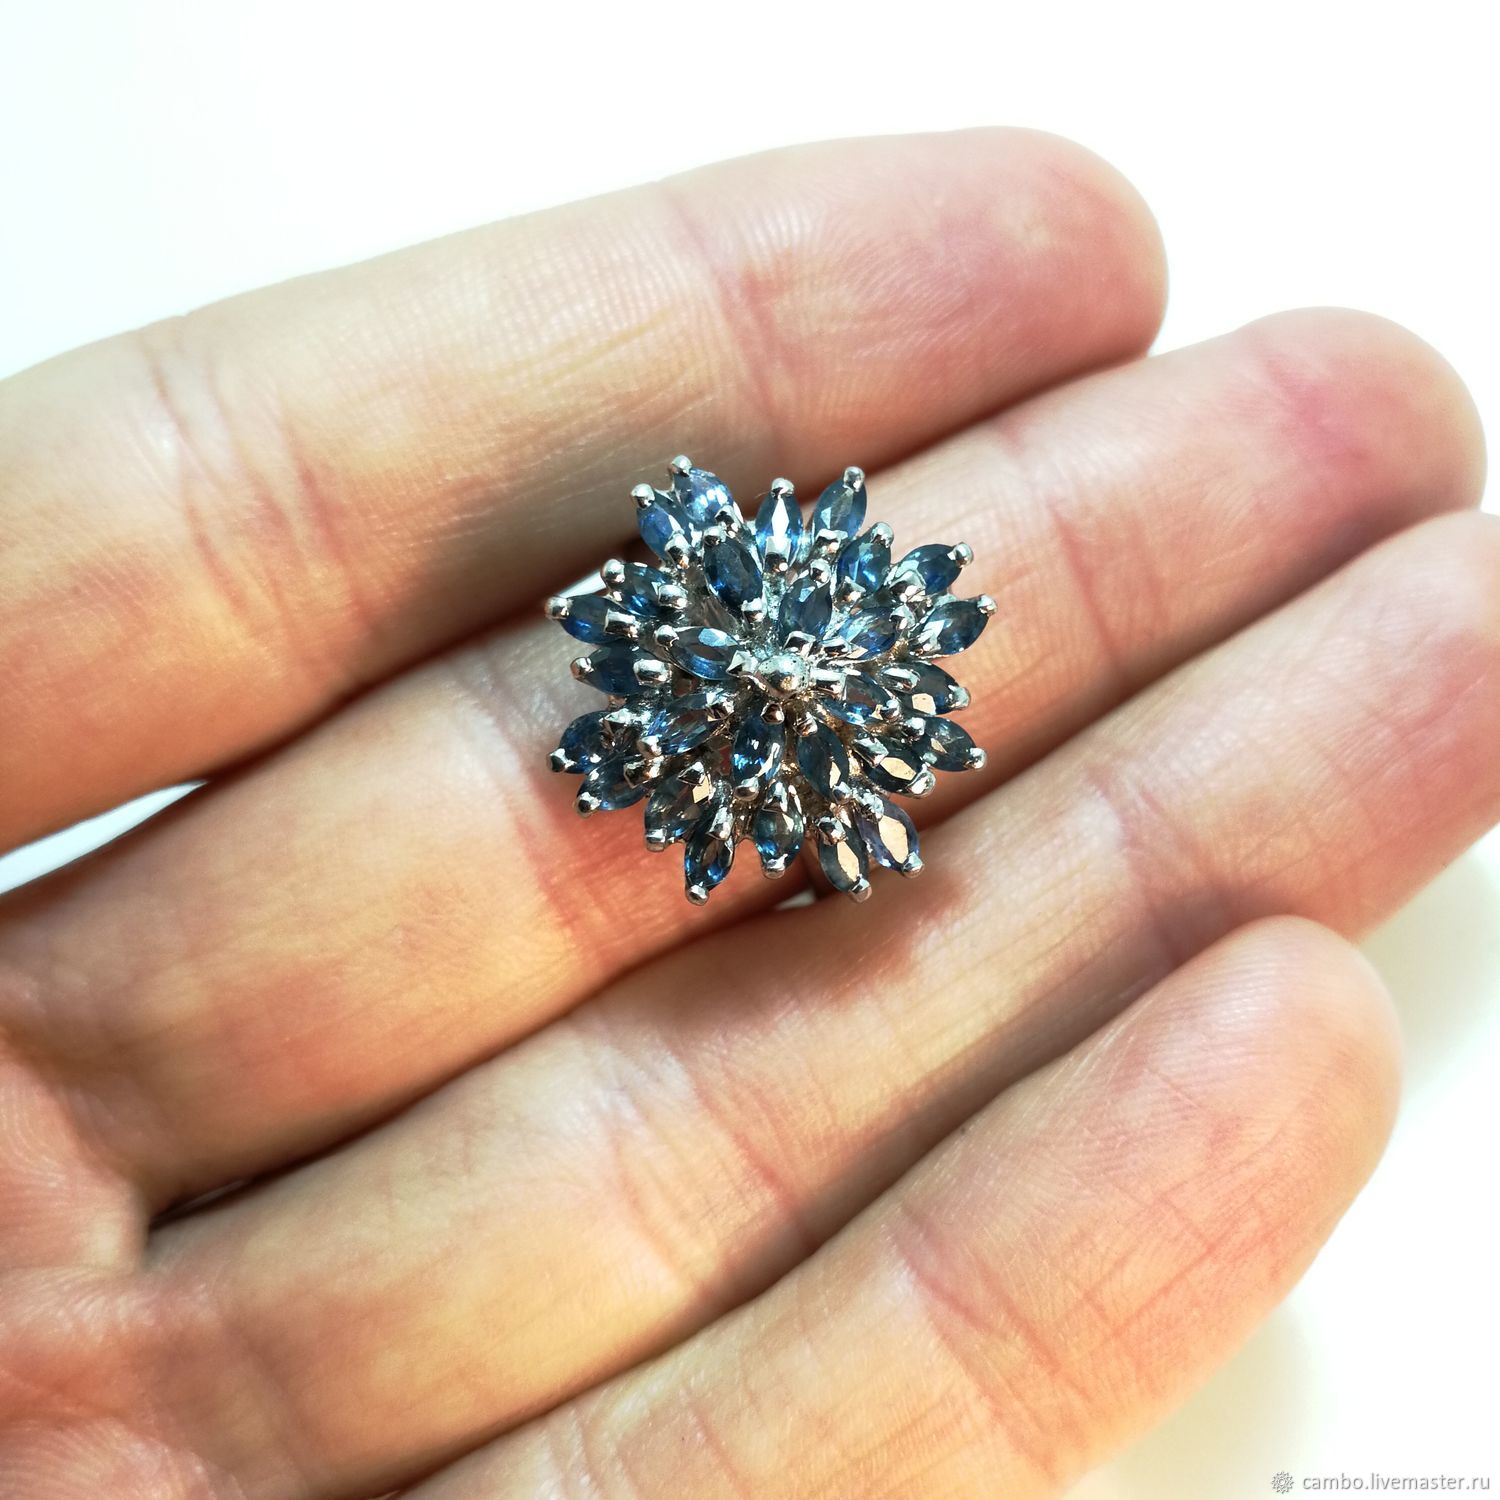 Ring 'snowflake' light blue sapphires, Rings, Moscow,  Фото №1